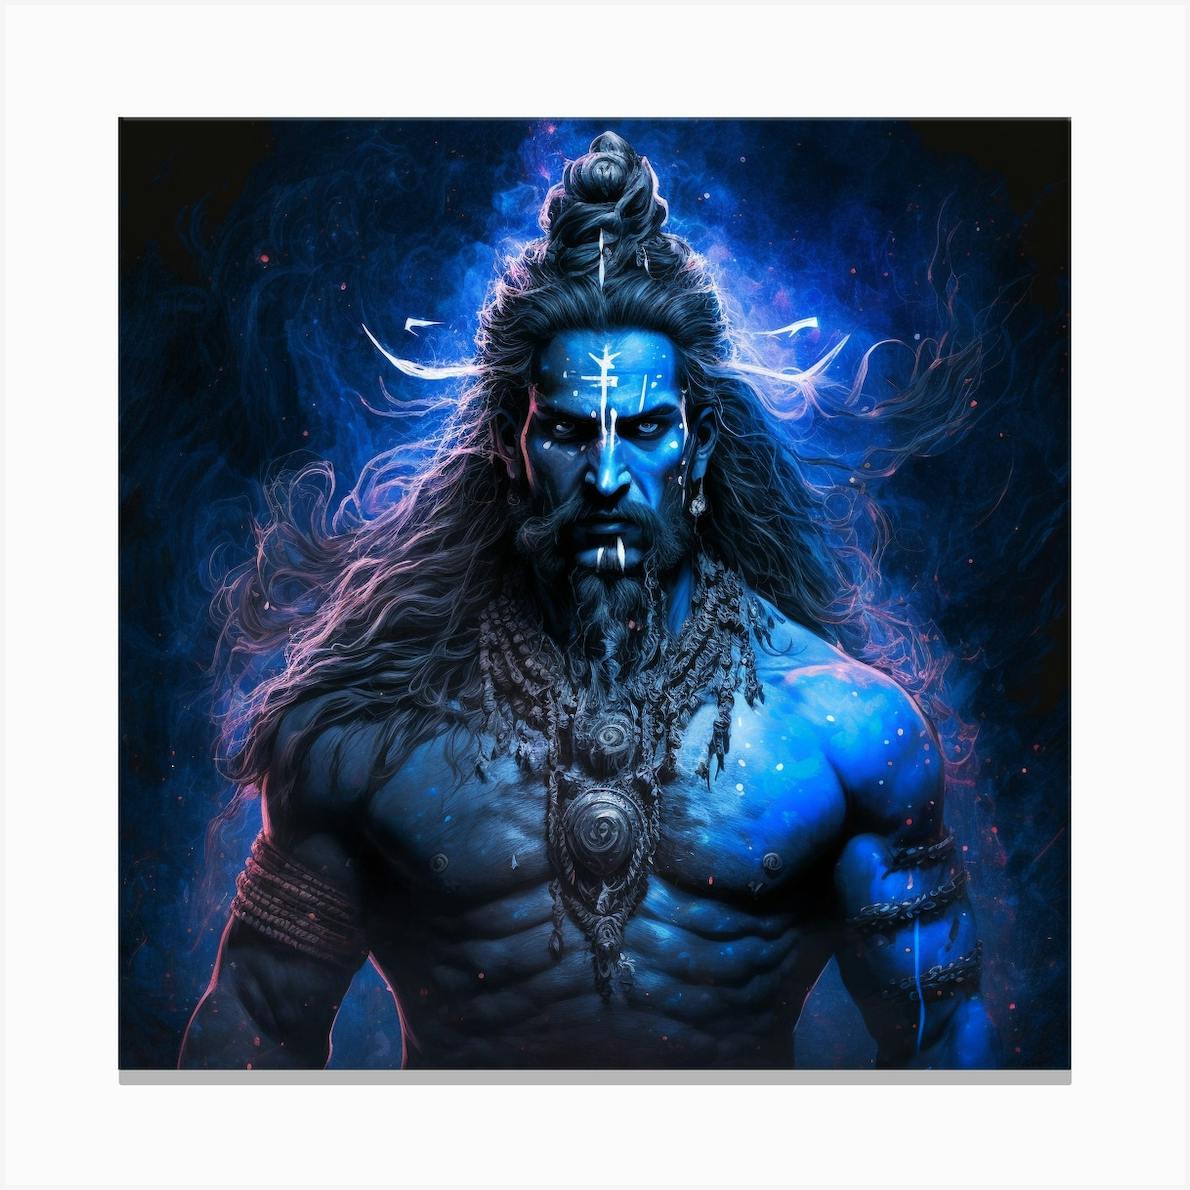 Incredible Compilation of Full 4K Rudra Shiva Images - Over 999+  Breathtaking Rudra Shiva Images